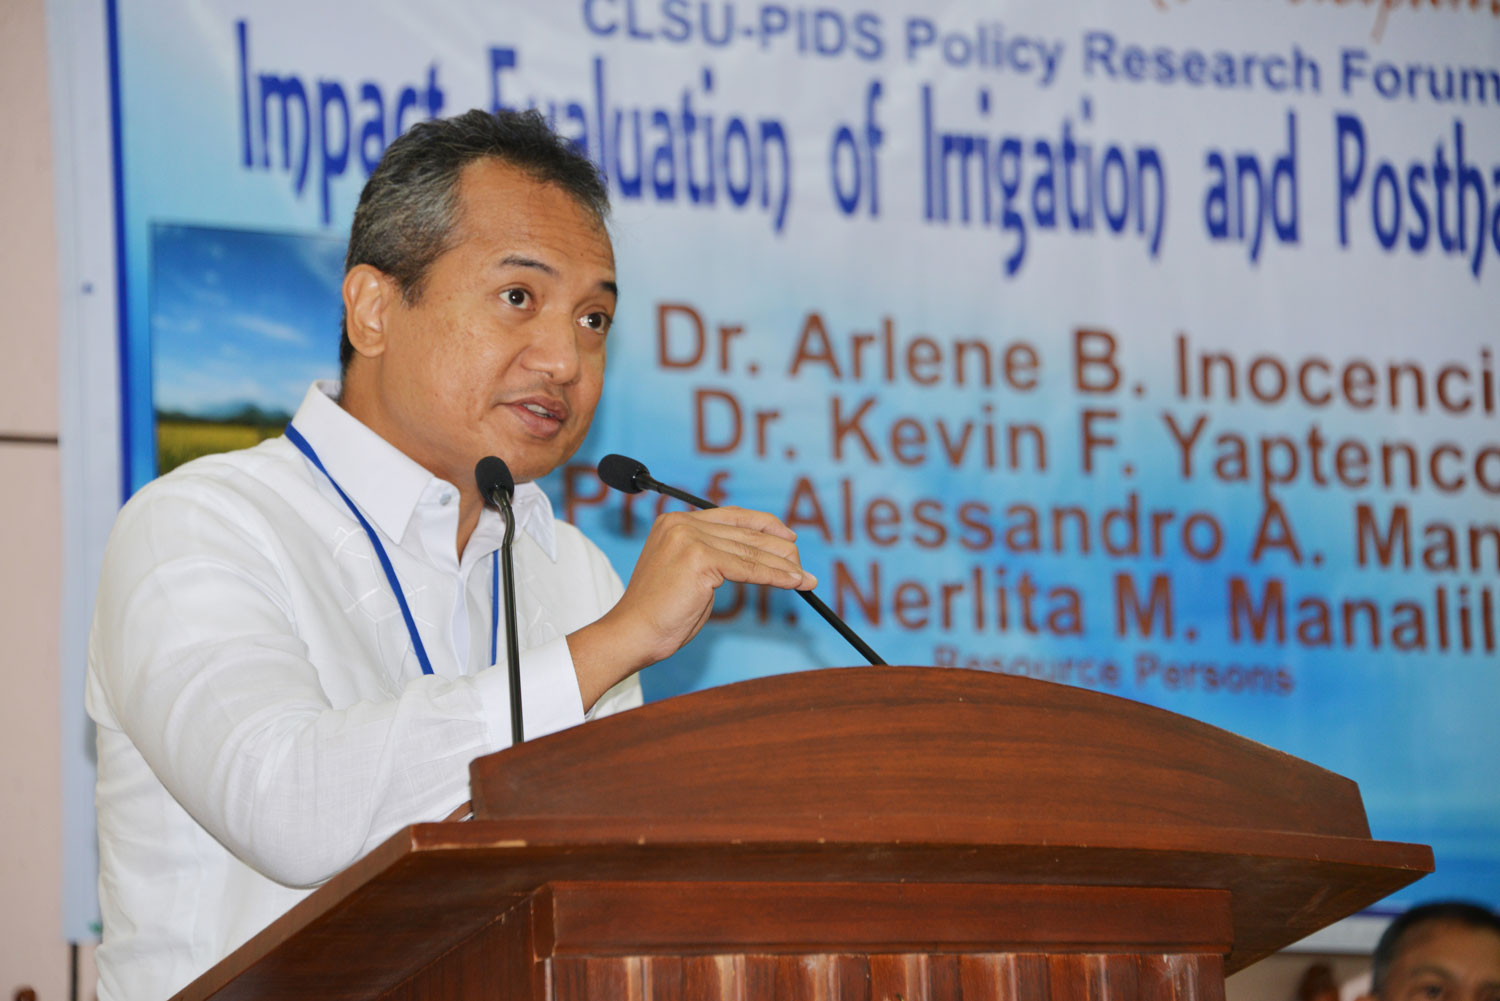 PIDS-CLSU Forum On Impact Evaluation Of Irrigation And Postharvest Facilities-DSC_5755.jpg